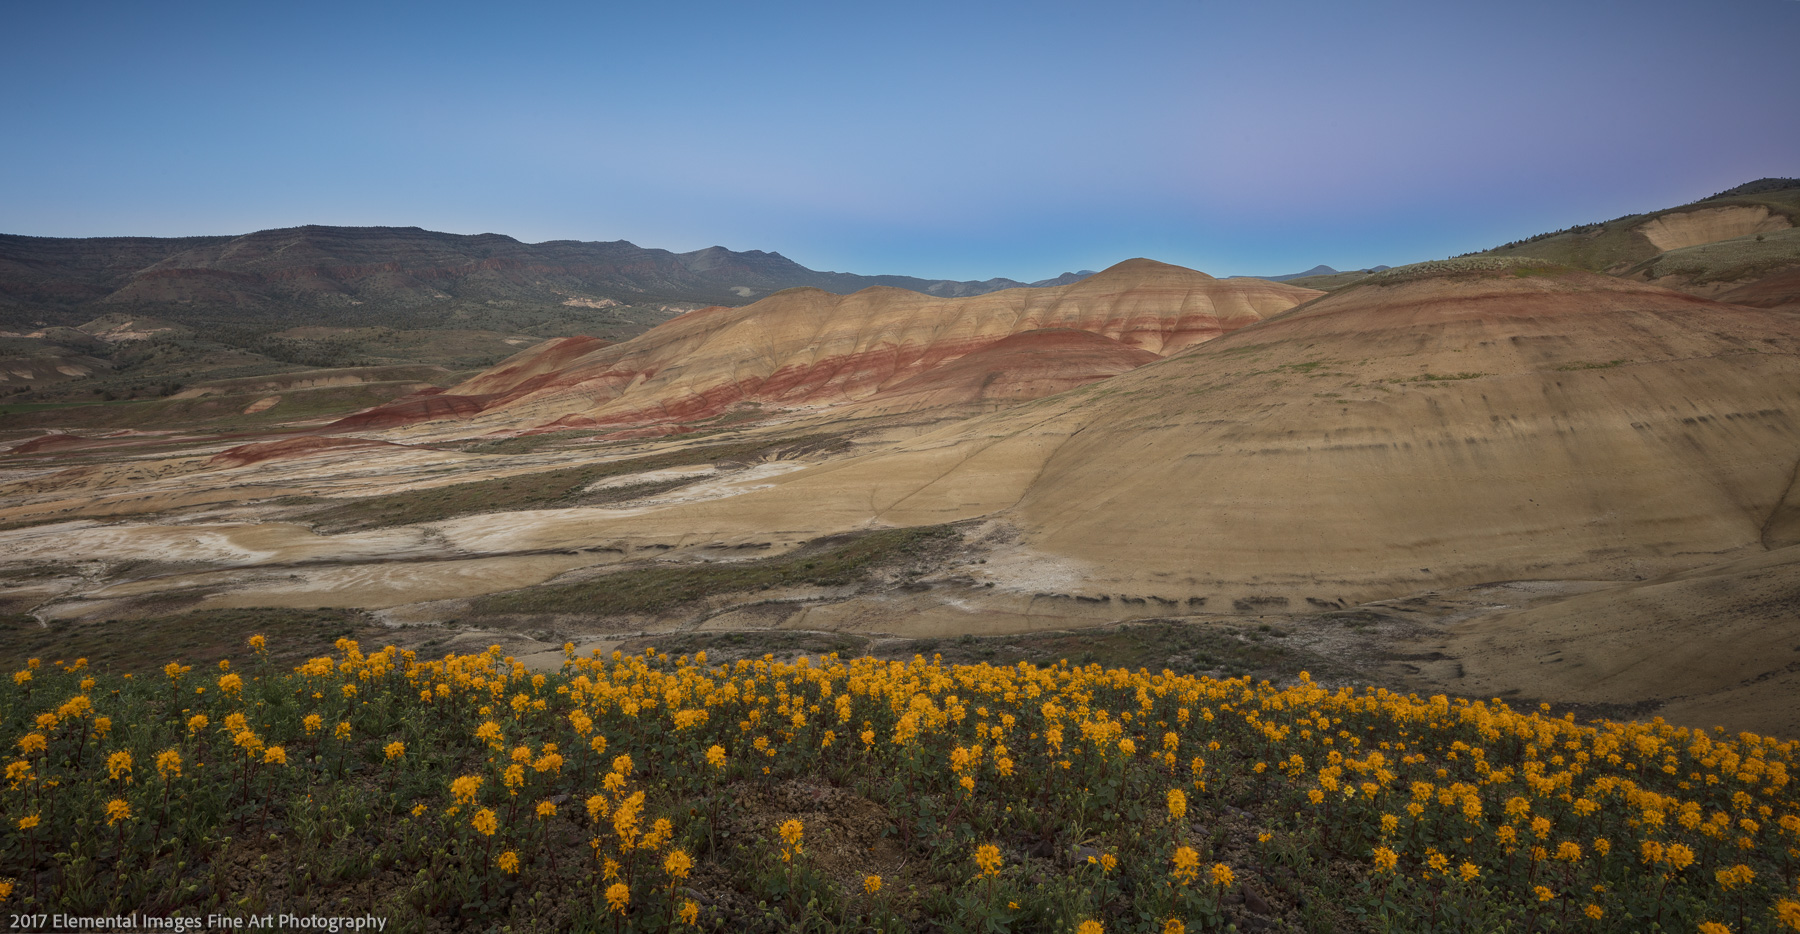 Last Light on the Painted Hills | John Day Fossil Beds National Monument | OR | USA - © 2017 Elemental Images Fine Art Photography - All Rights Reserved Worldwide